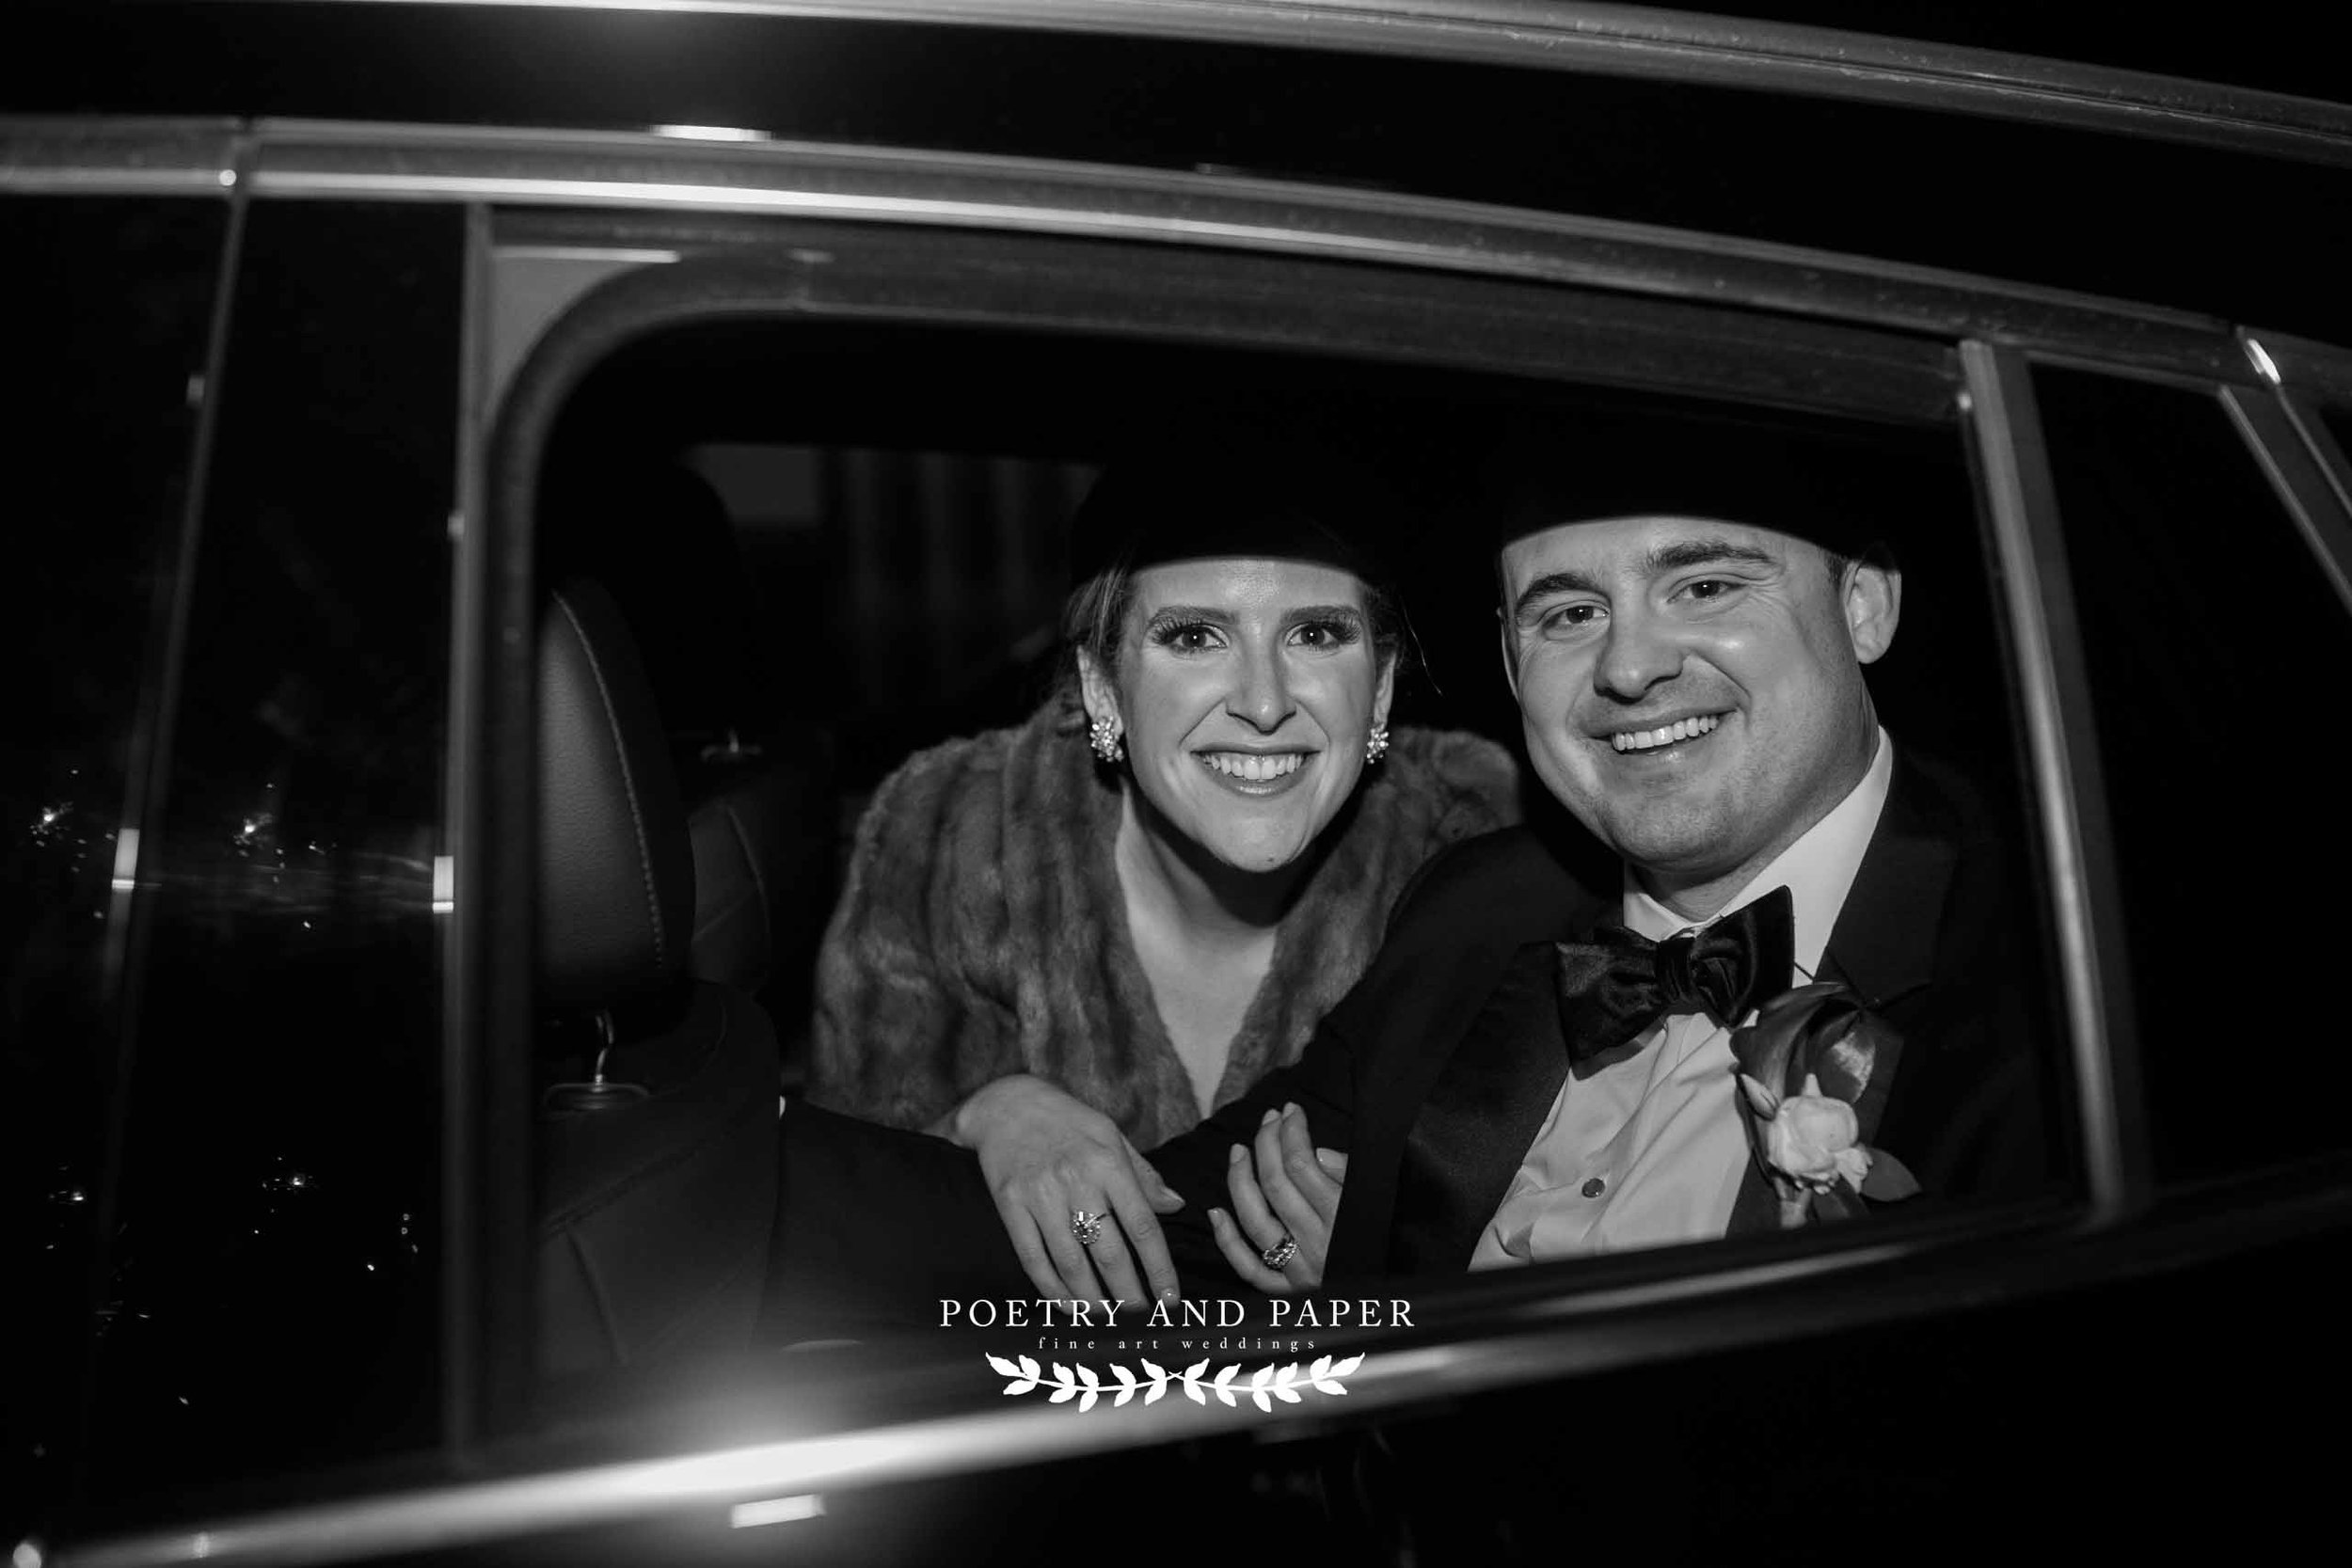 Top Destination Wedding Photographer based in Atlanta- Timeless- Poetry and Paper- Dawn Johnson- black and white bride and groom limousine exit.jpg